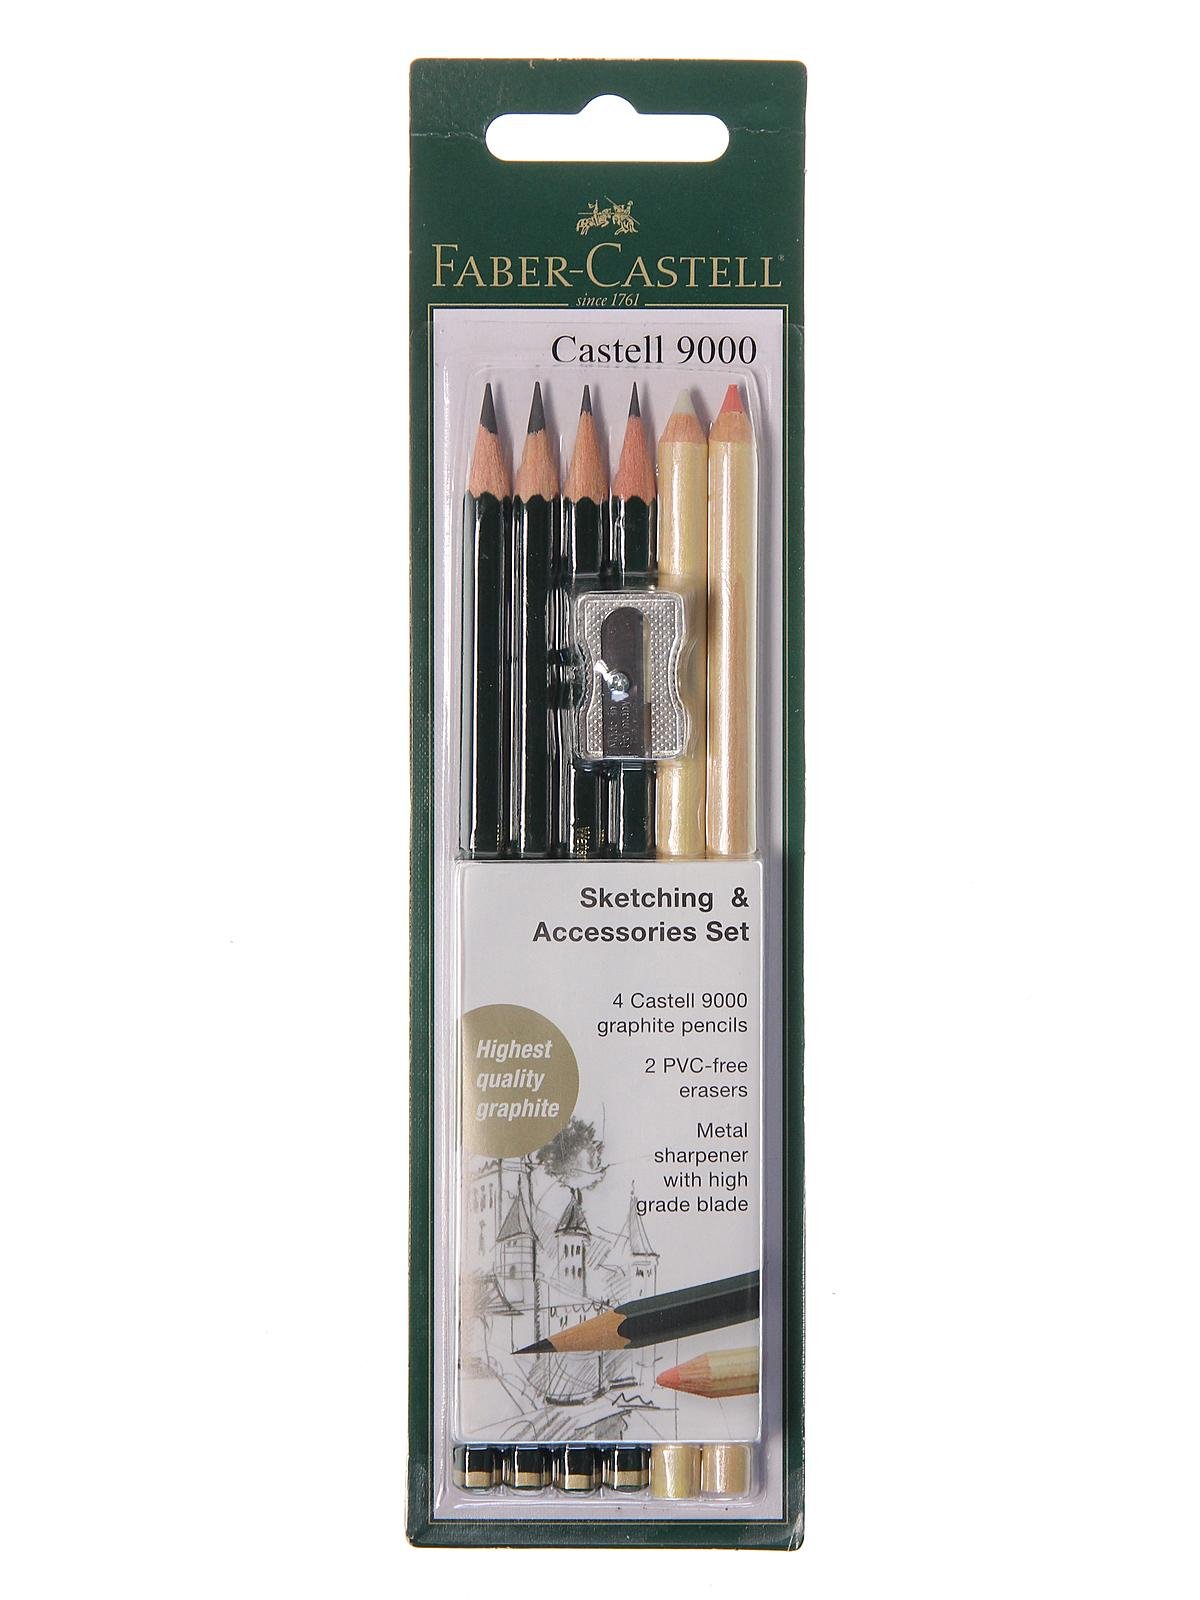 FaberCastell Pencils Castell 9000 Artist graphite pencils 4B black lead  Pencil for drawing sketch shading  box of 12  Amazonin Home  Kitchen